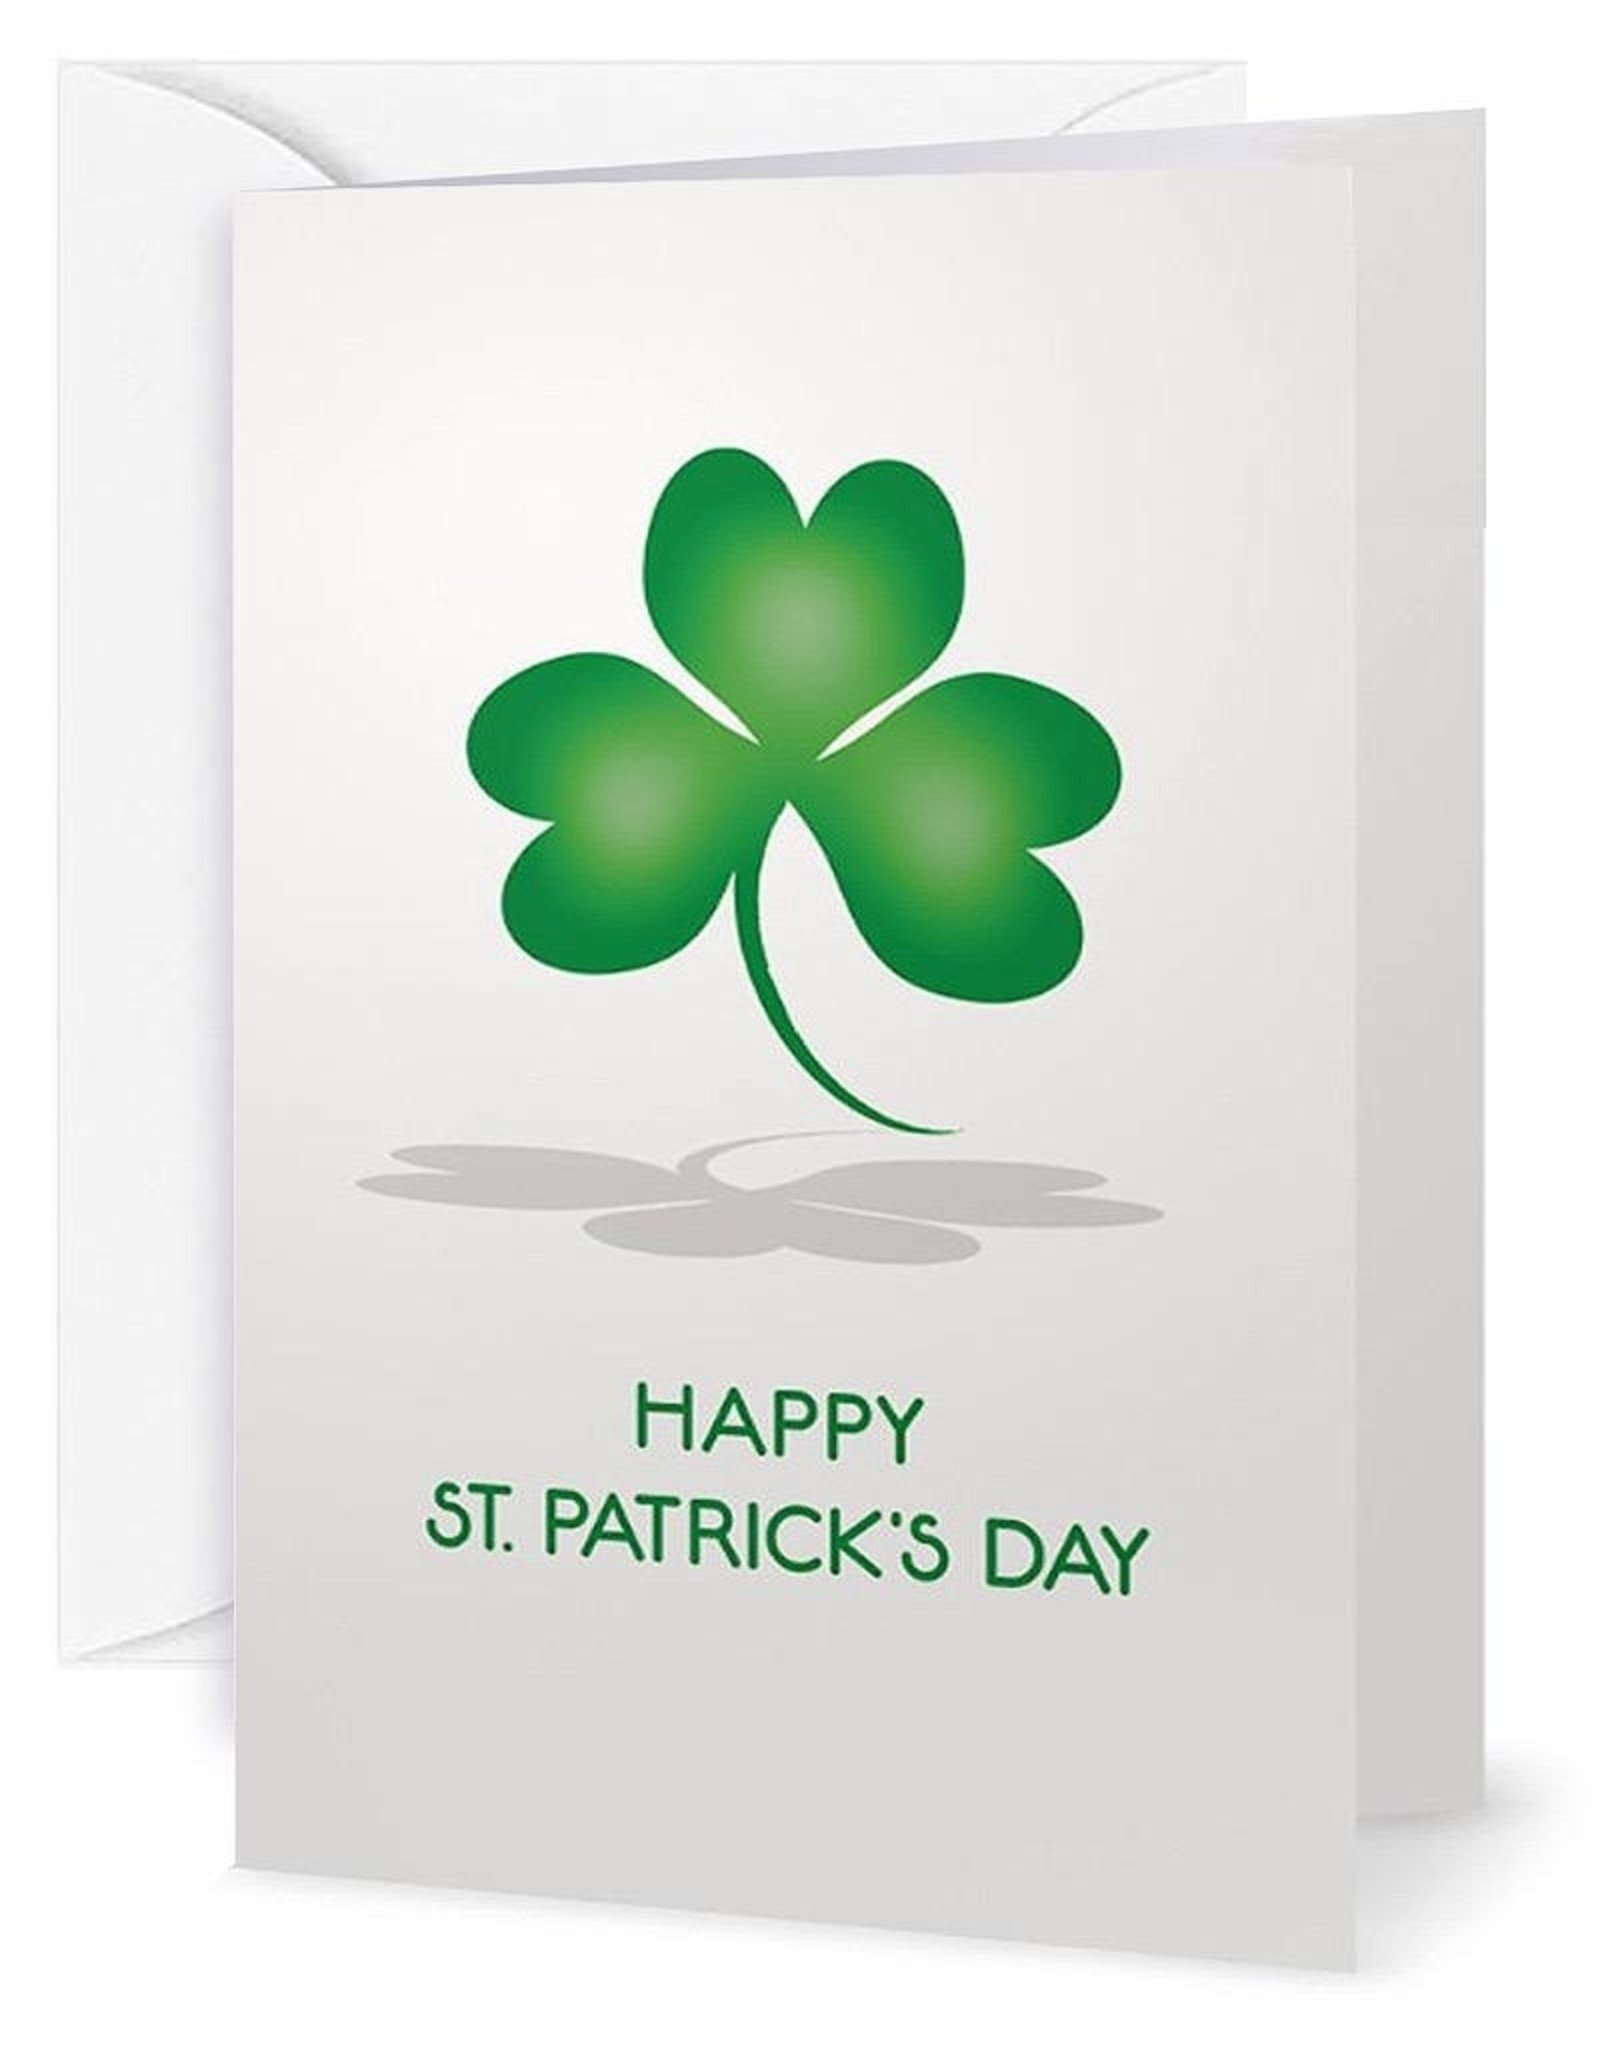 Charles W St Patricks Day Card Happiness Health Good Fortune Irish Blessings